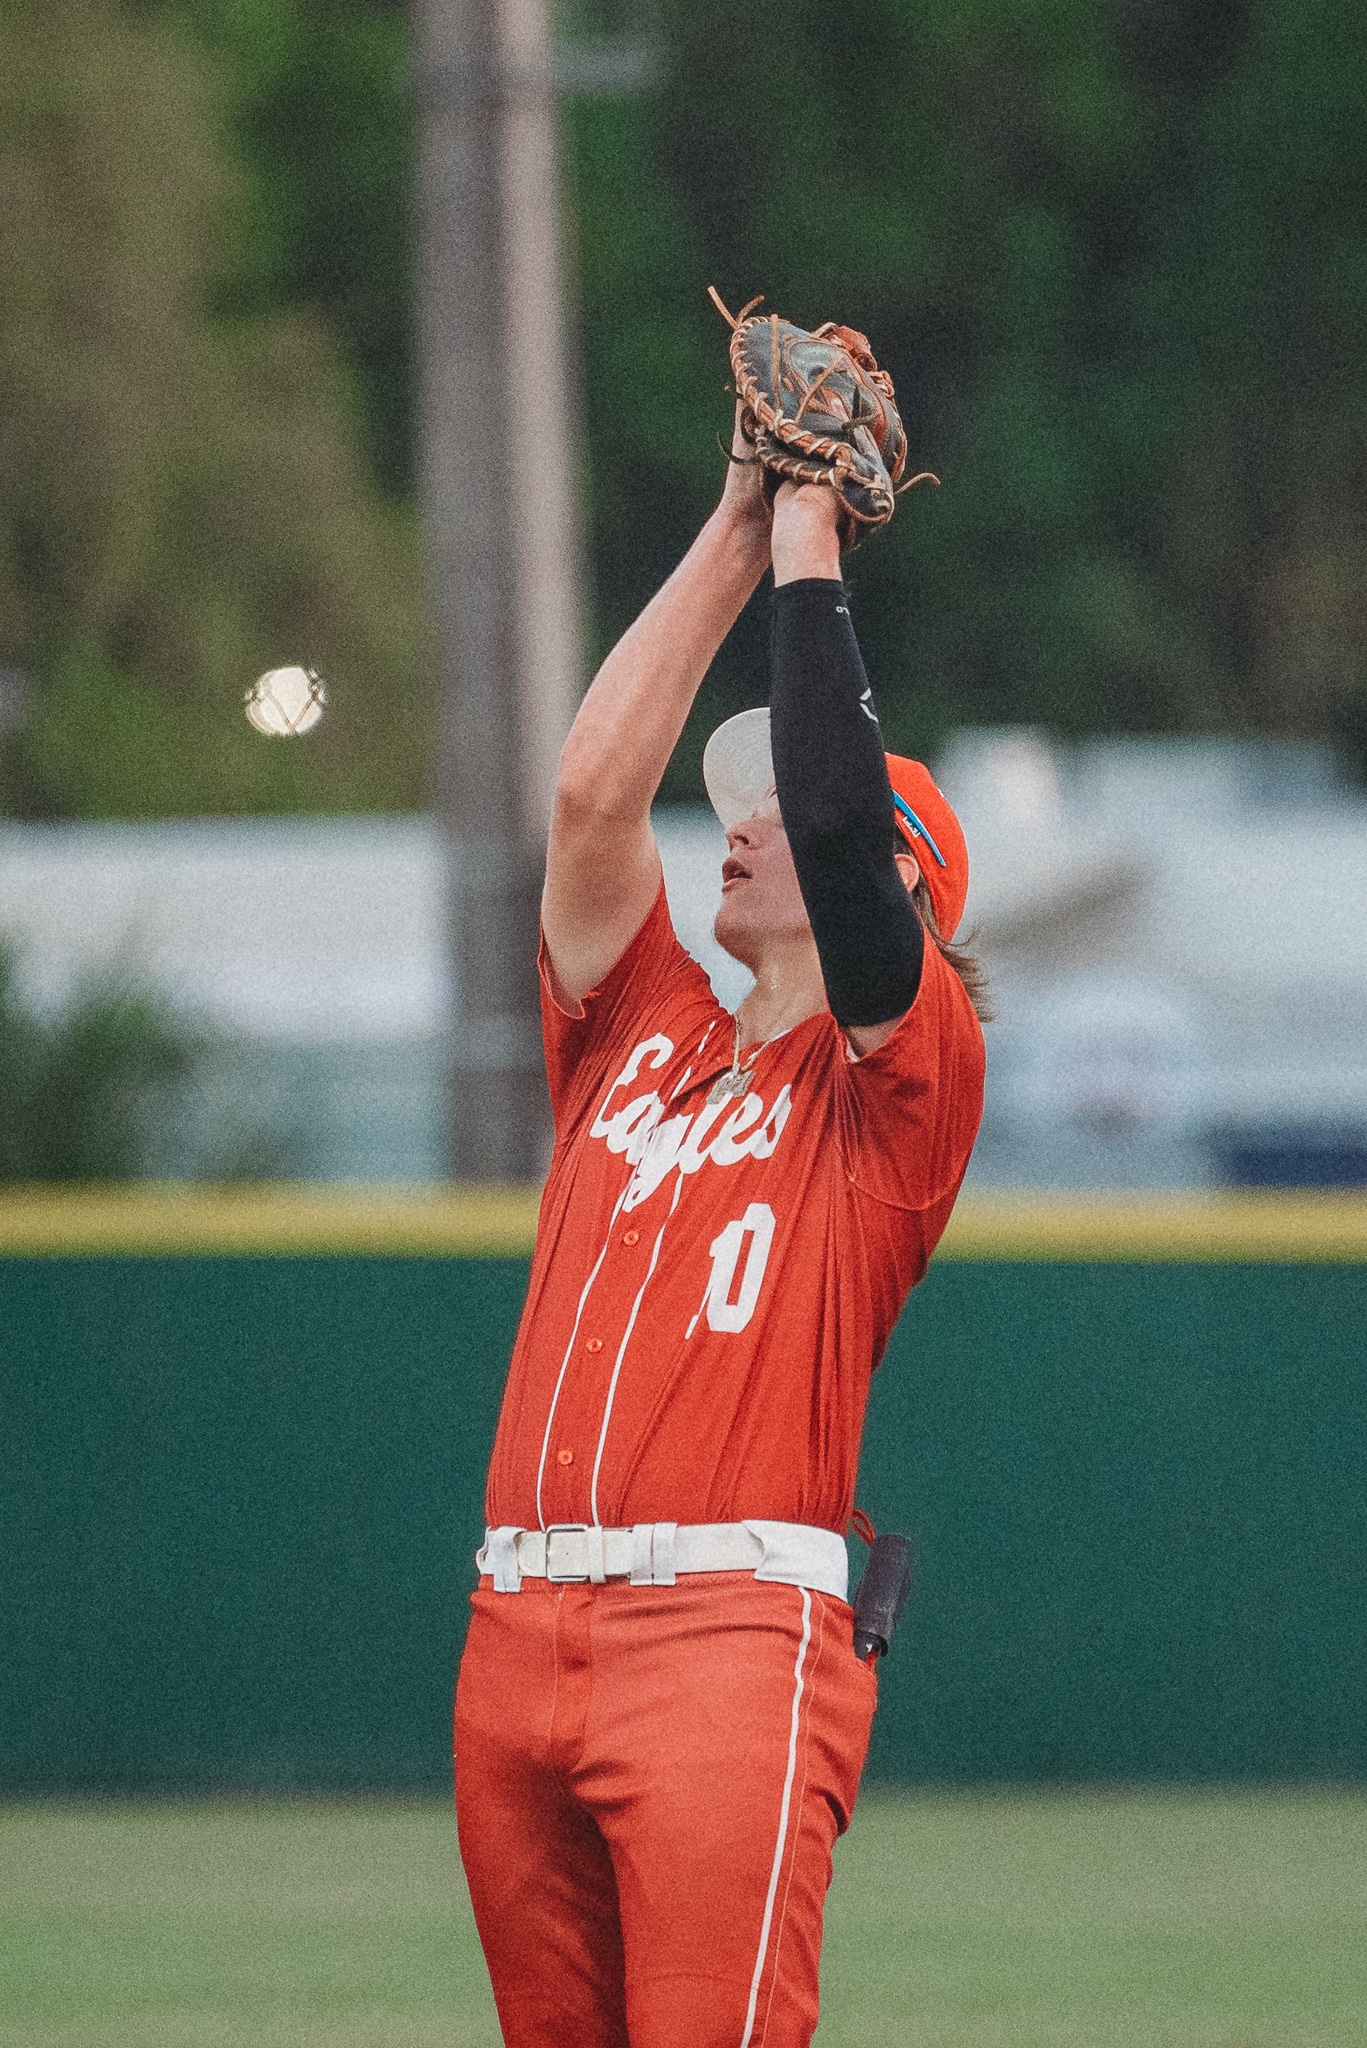 Michael Dressendorfer (Sr) of Springstead catches a pop-up. [Photo by Cynthia Leota]